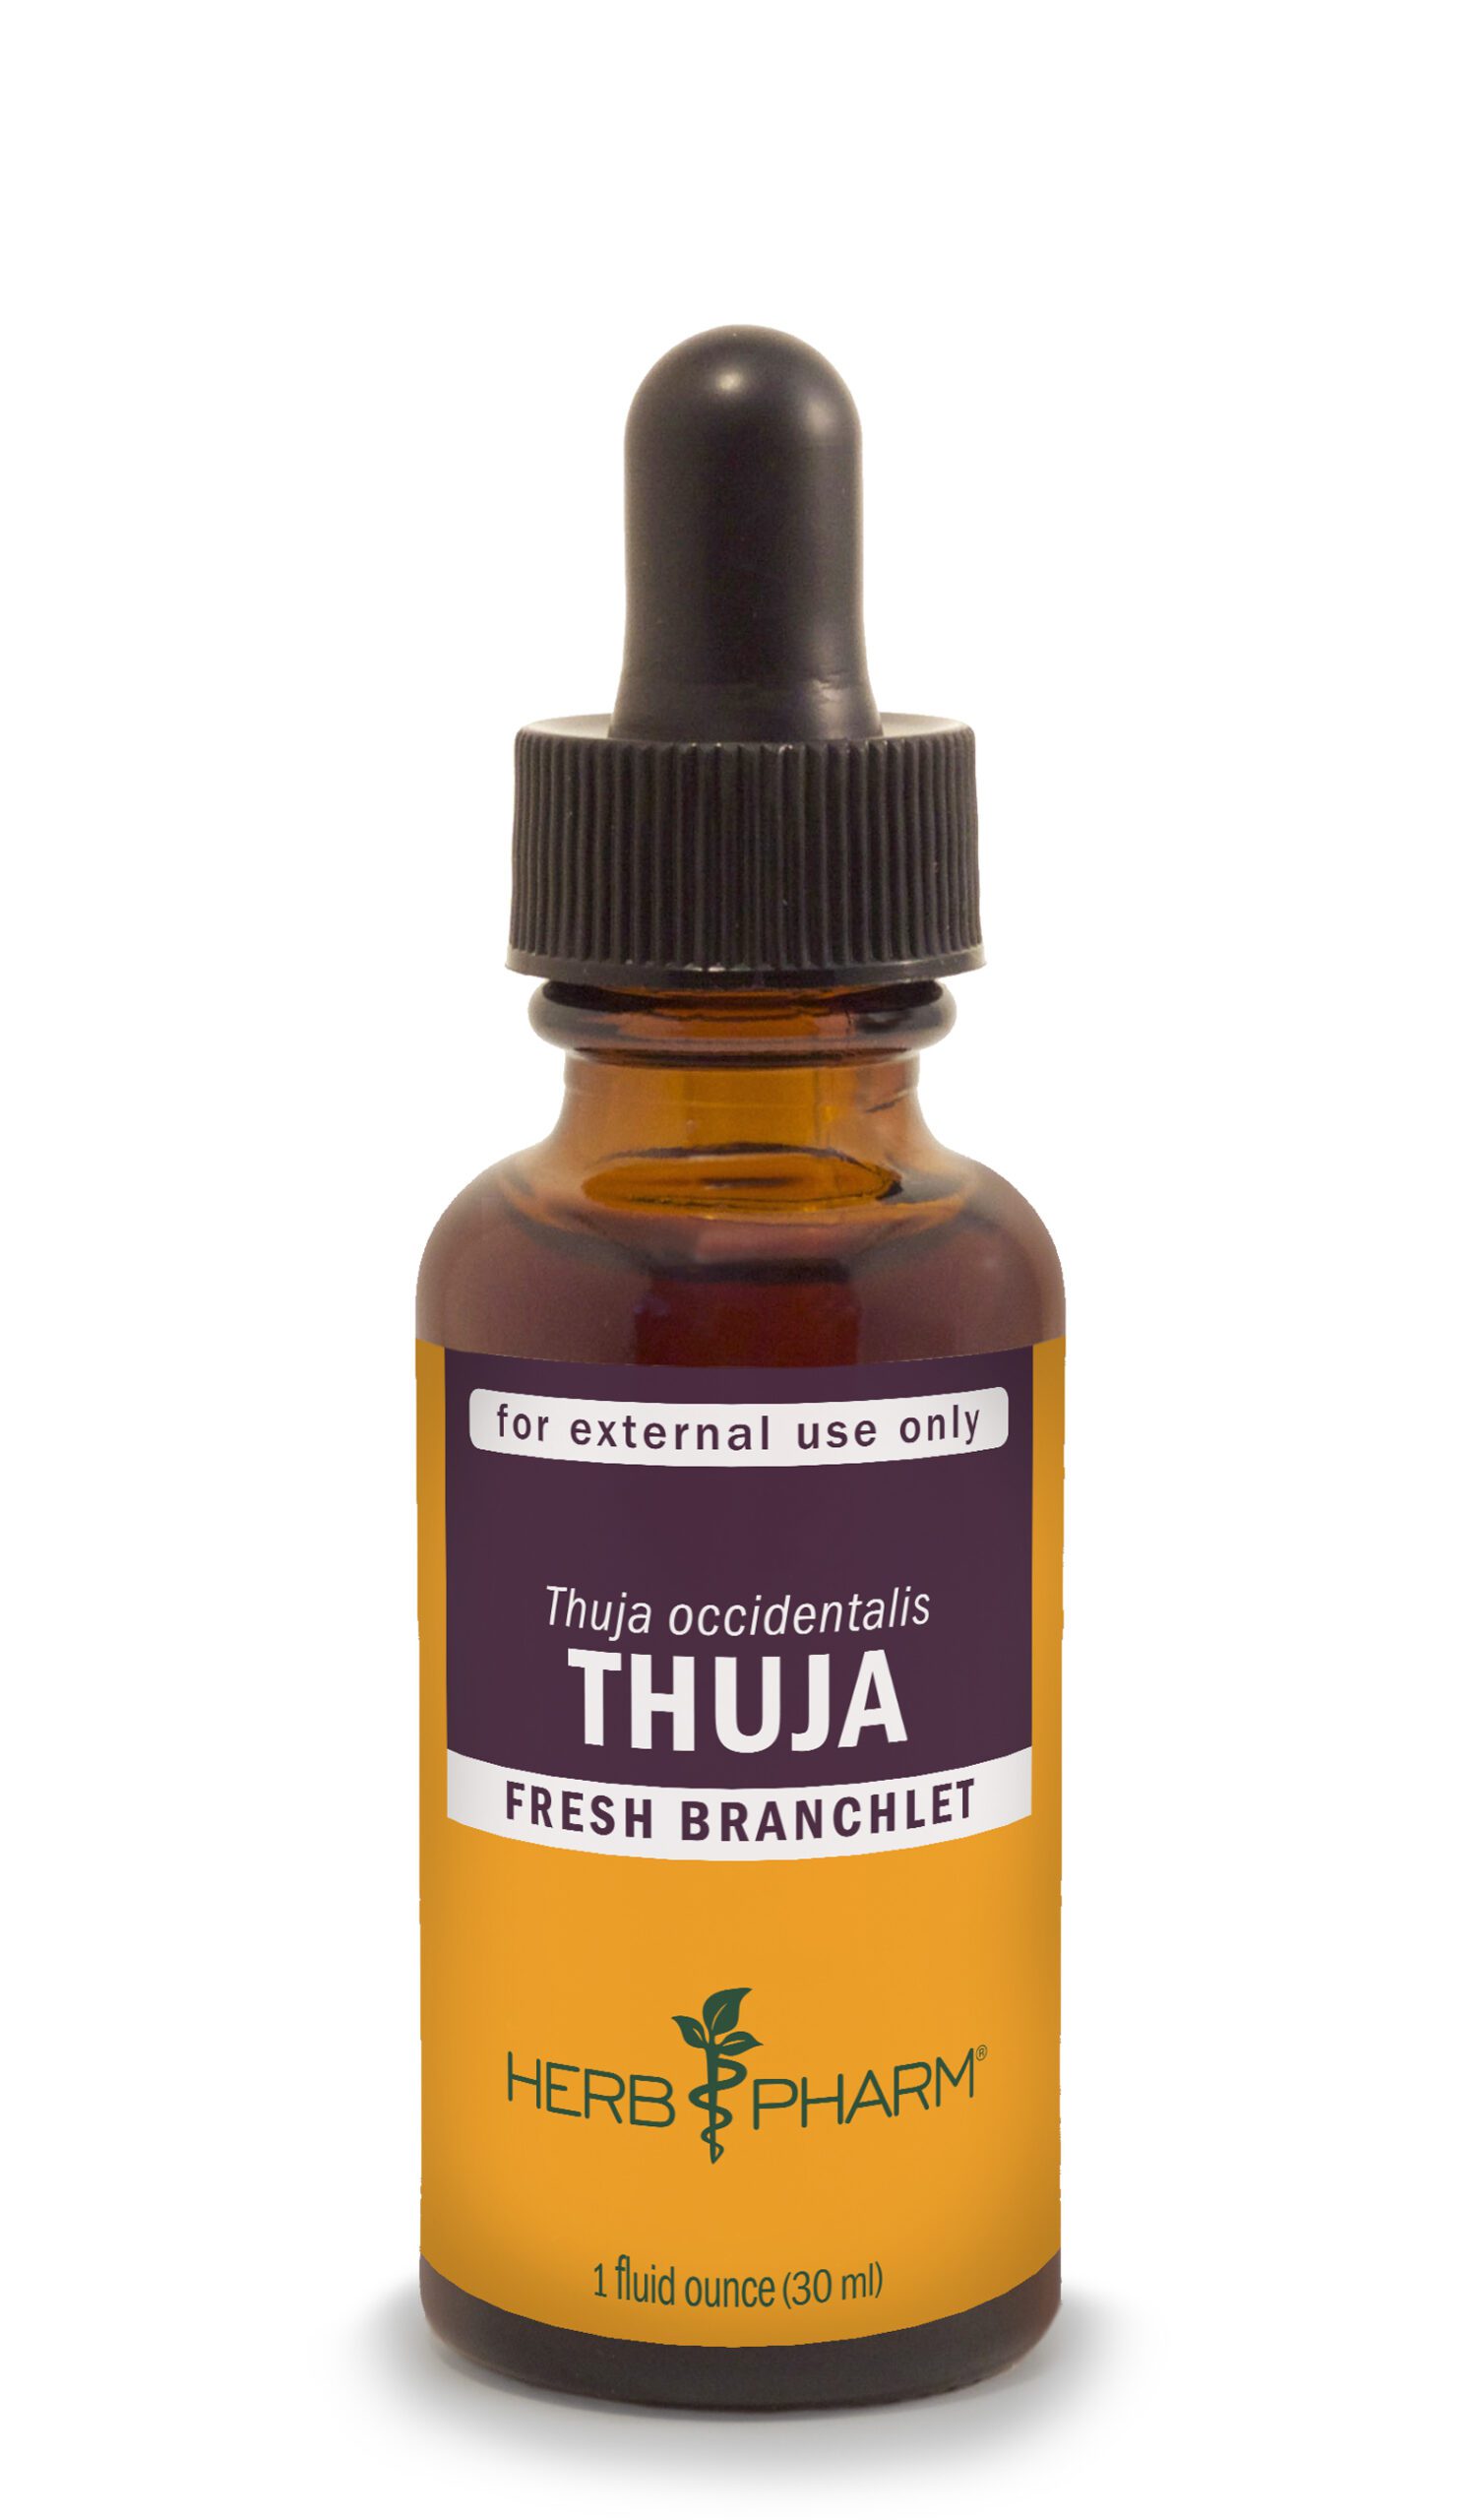 Product Listing Image for Herb Pharm Thuja Tincture 1oz